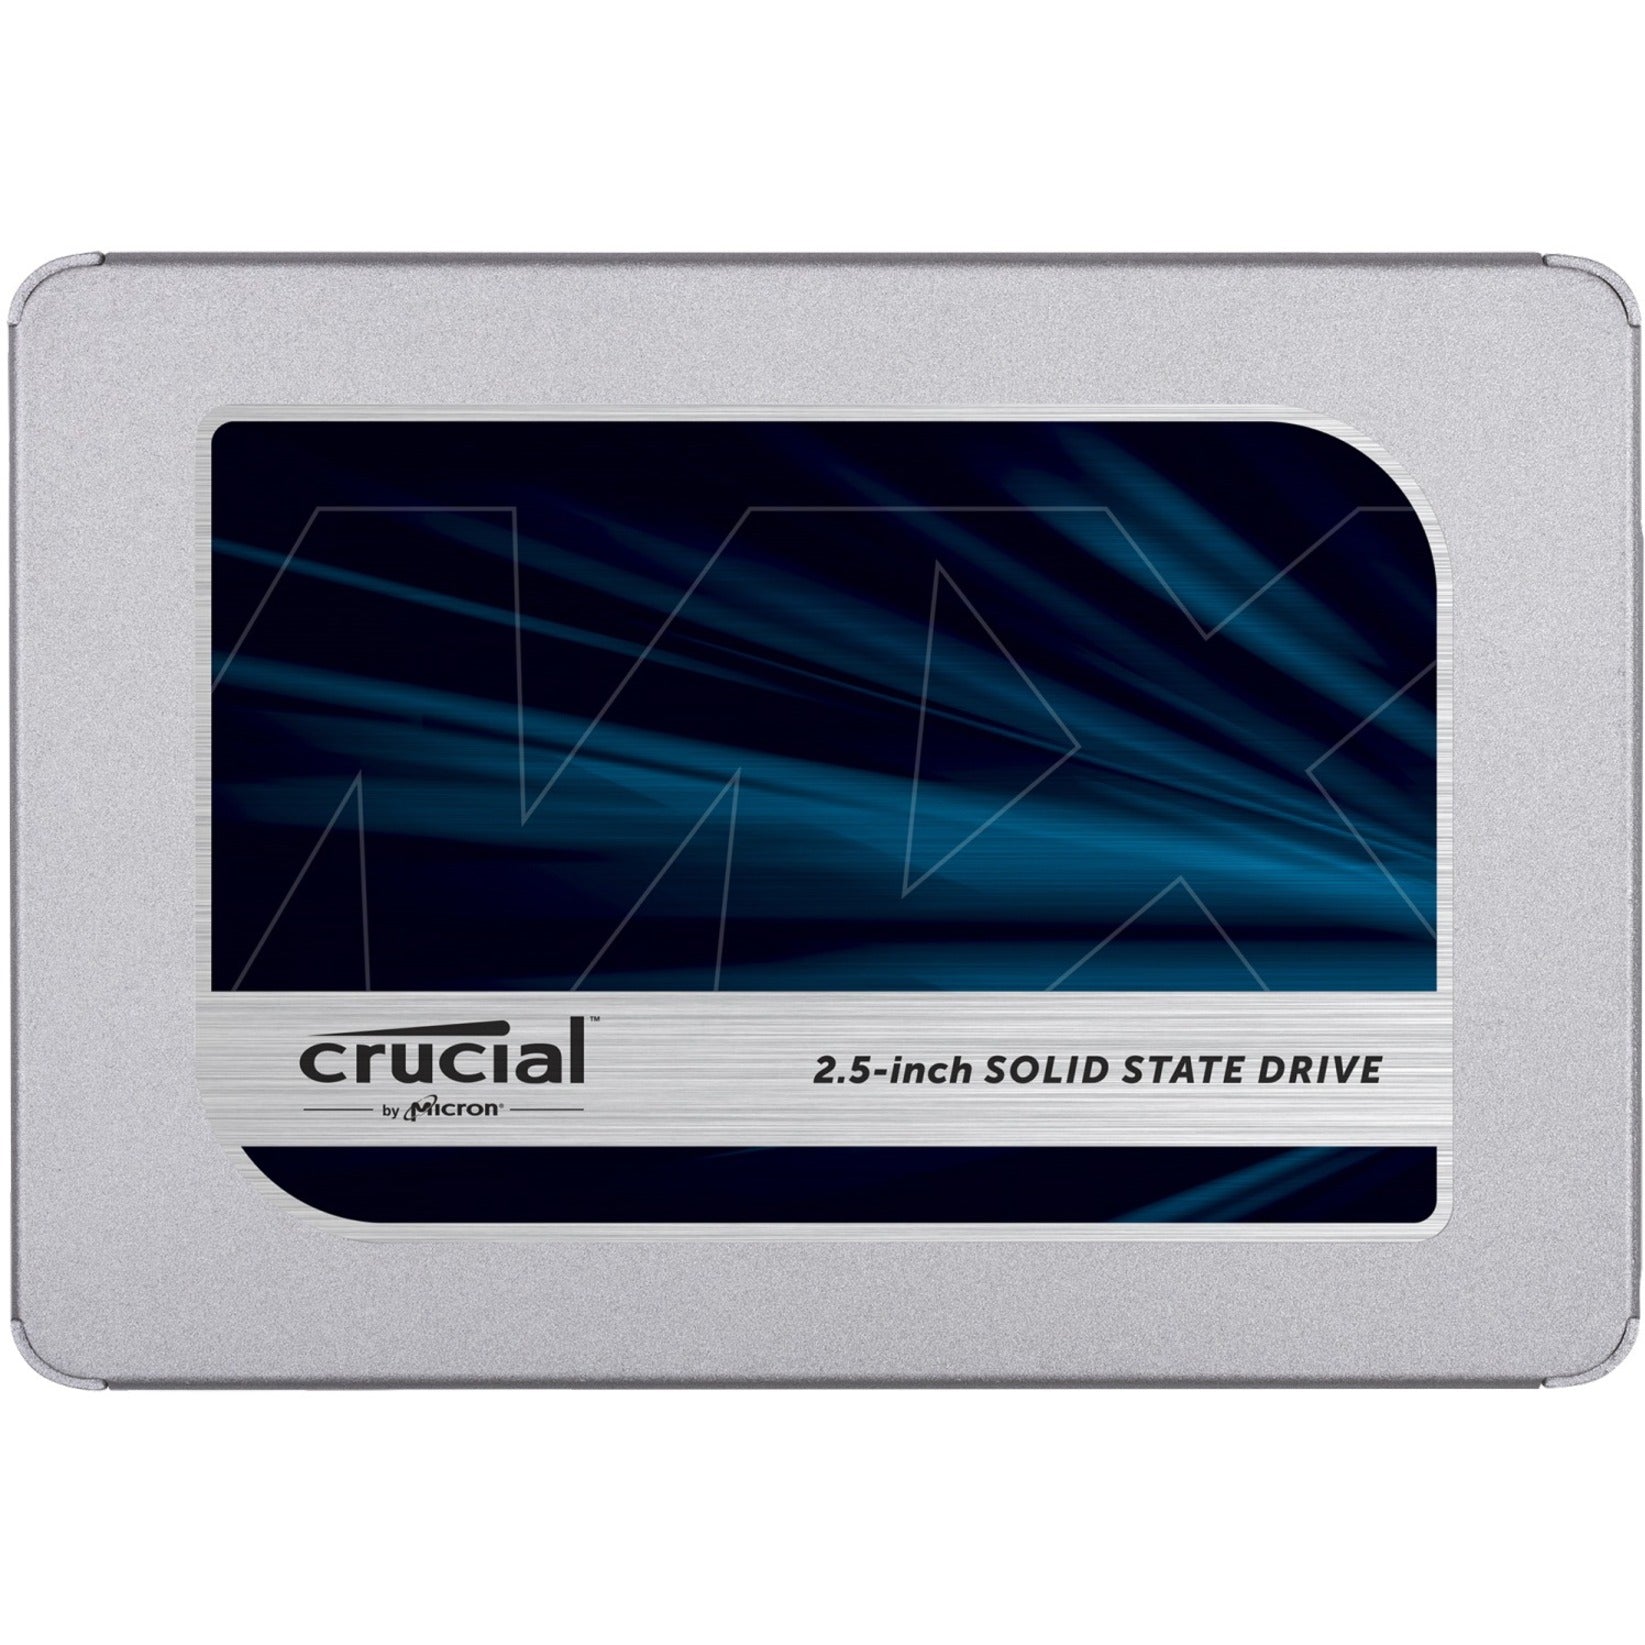 Crucial CT1000MX500SSD1 MX500 2.5-inch Solid State Drive, 1TB Storage Capacity, 5 Year Warranty